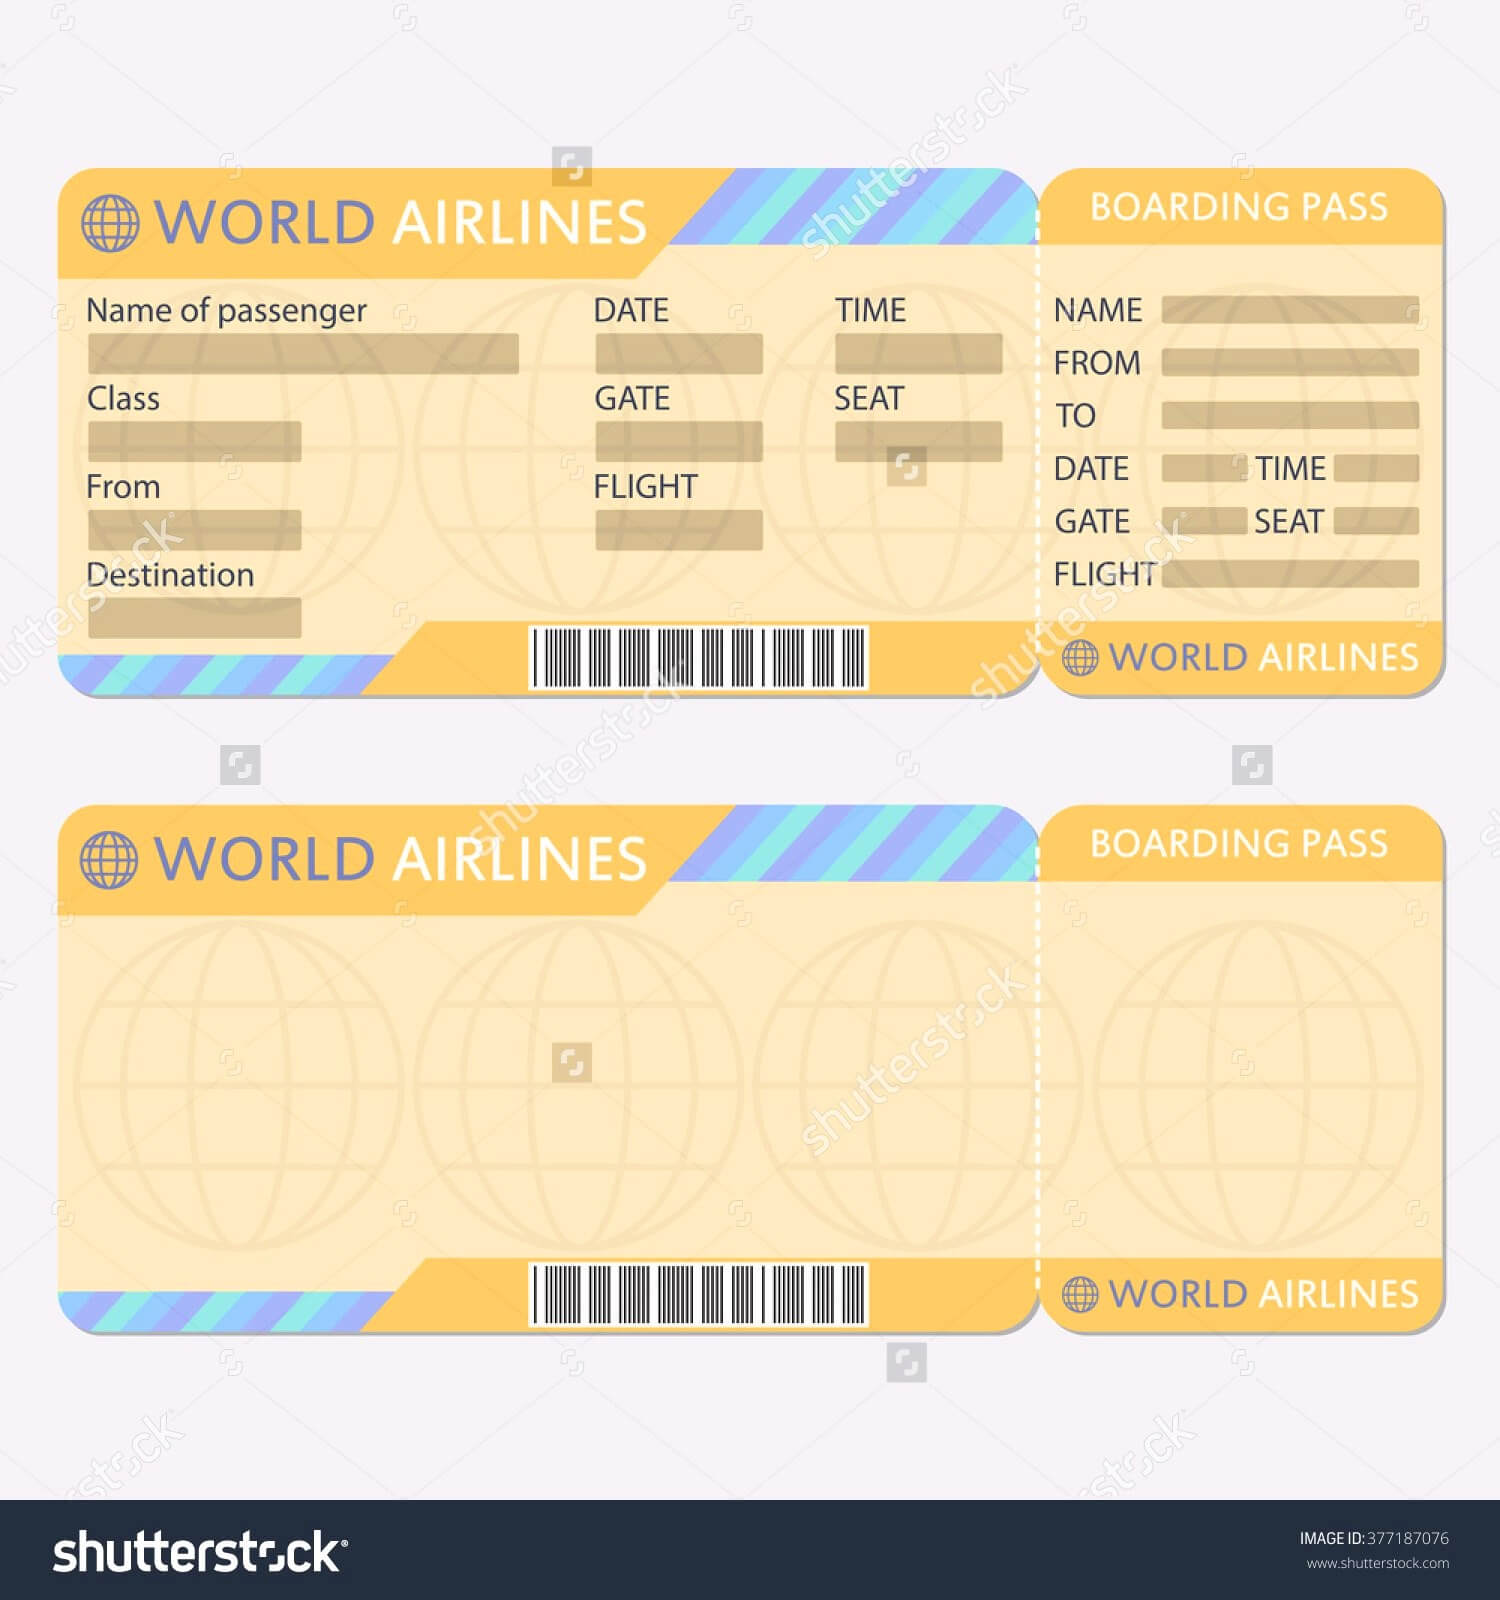 25 Images Of Free Boarding Pass Blank Template Word With Plane Ticket Template Word